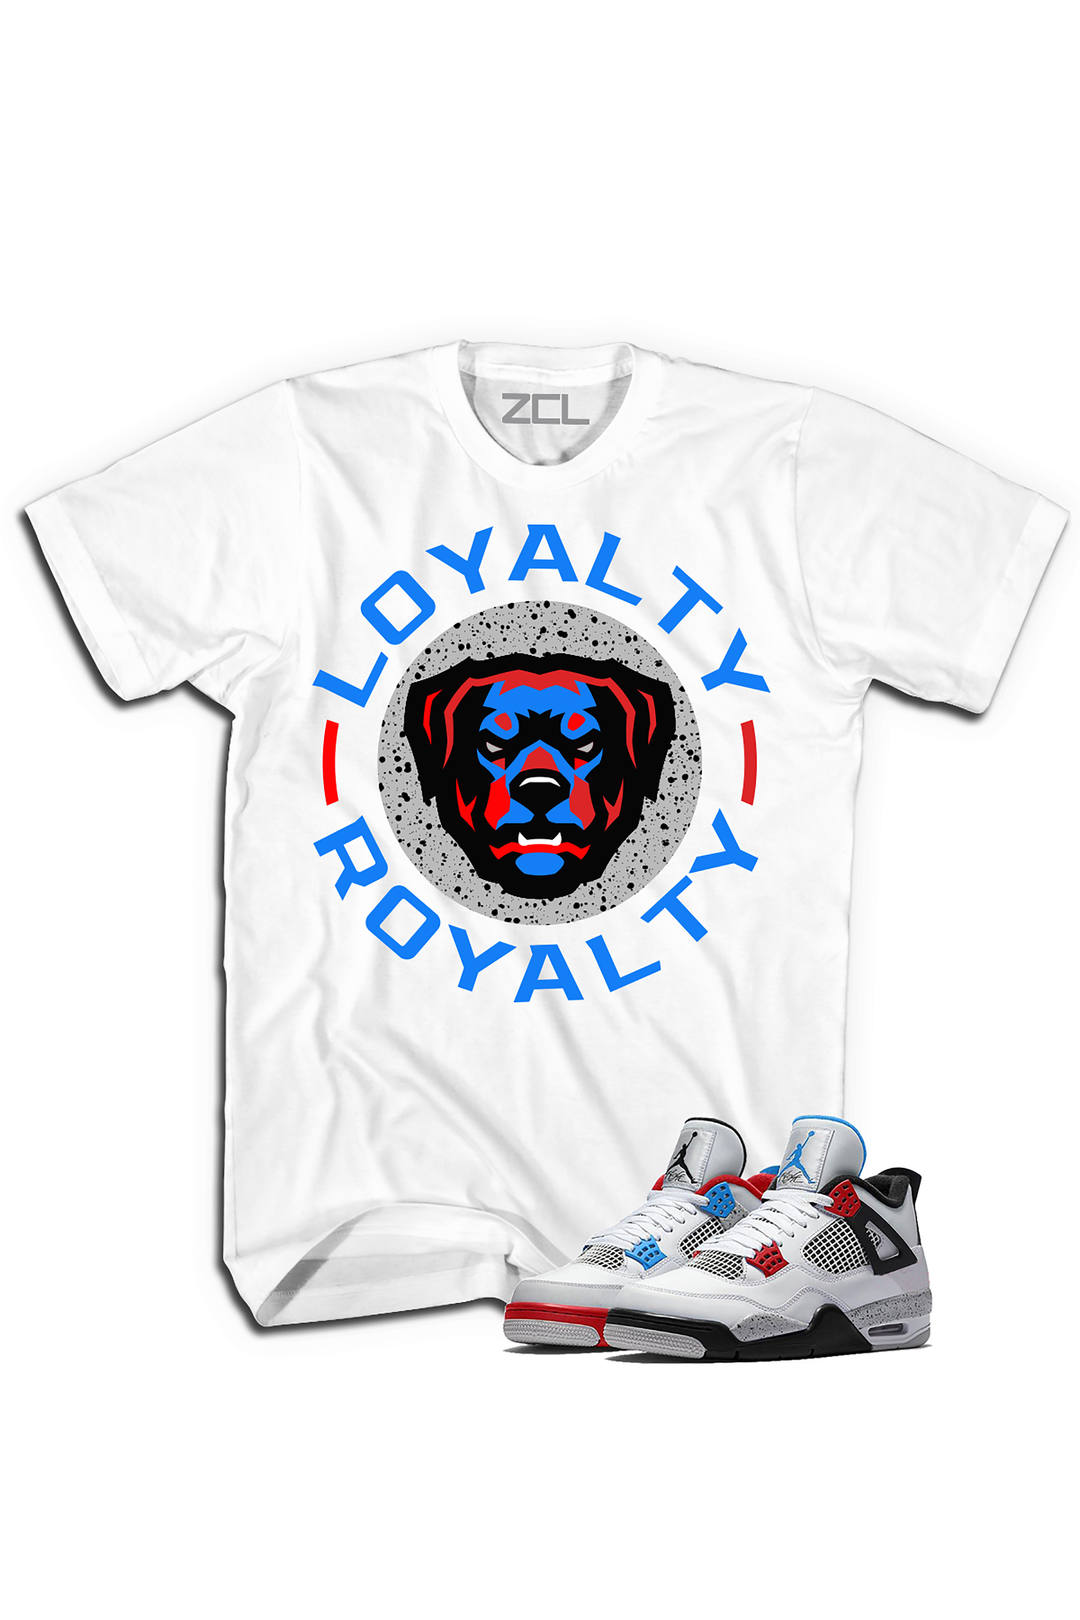 ZCL Loyalty-Royalty  “What The” Jordan 4 HookUp  Tee White - Zamage